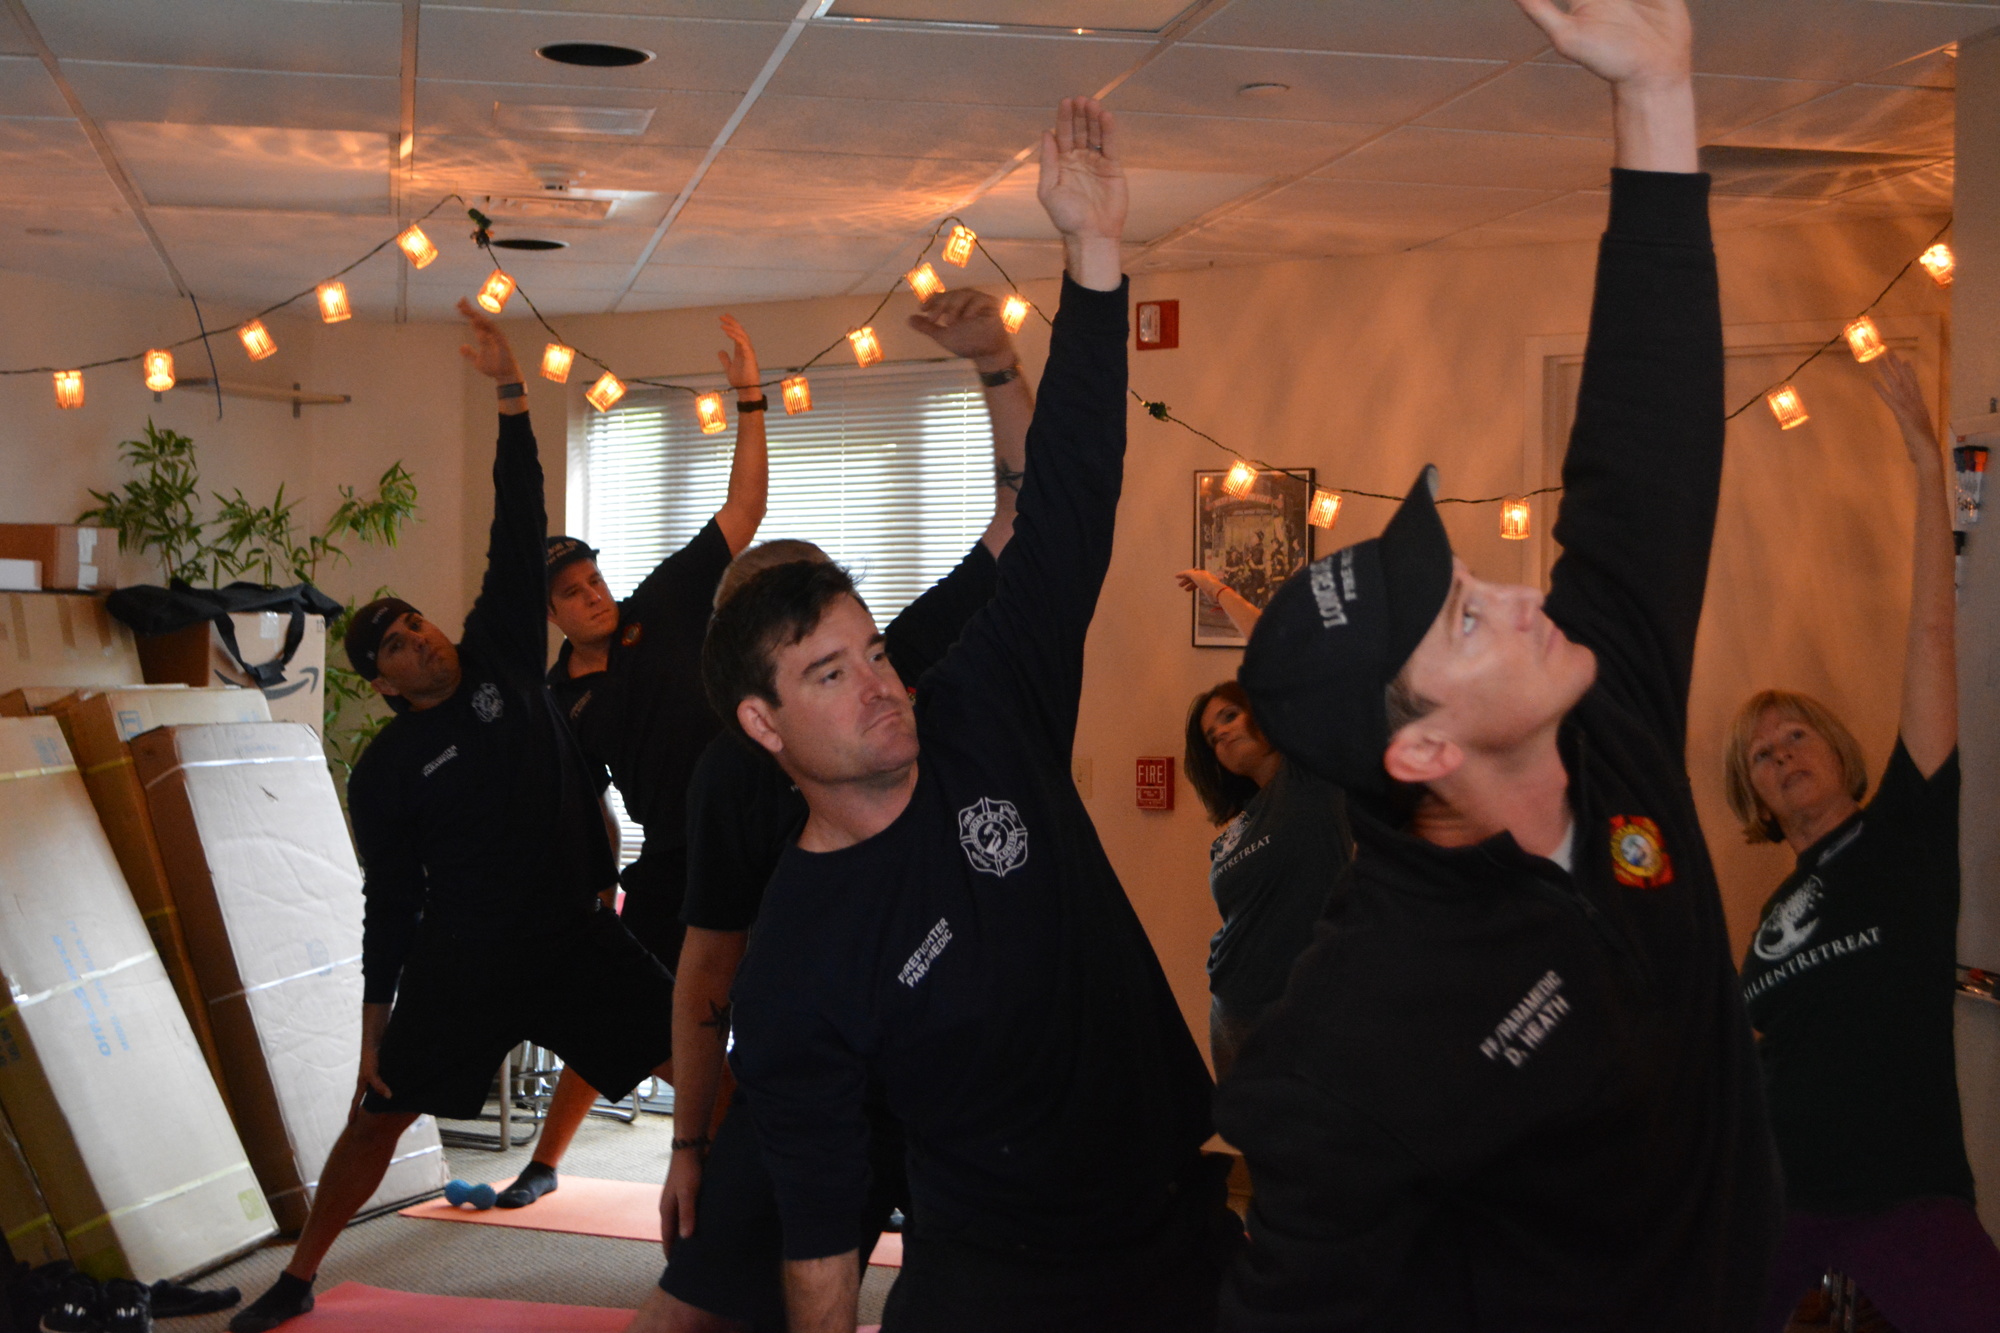 Longboat Key firefighters pose during a yoga session Jan. 30.